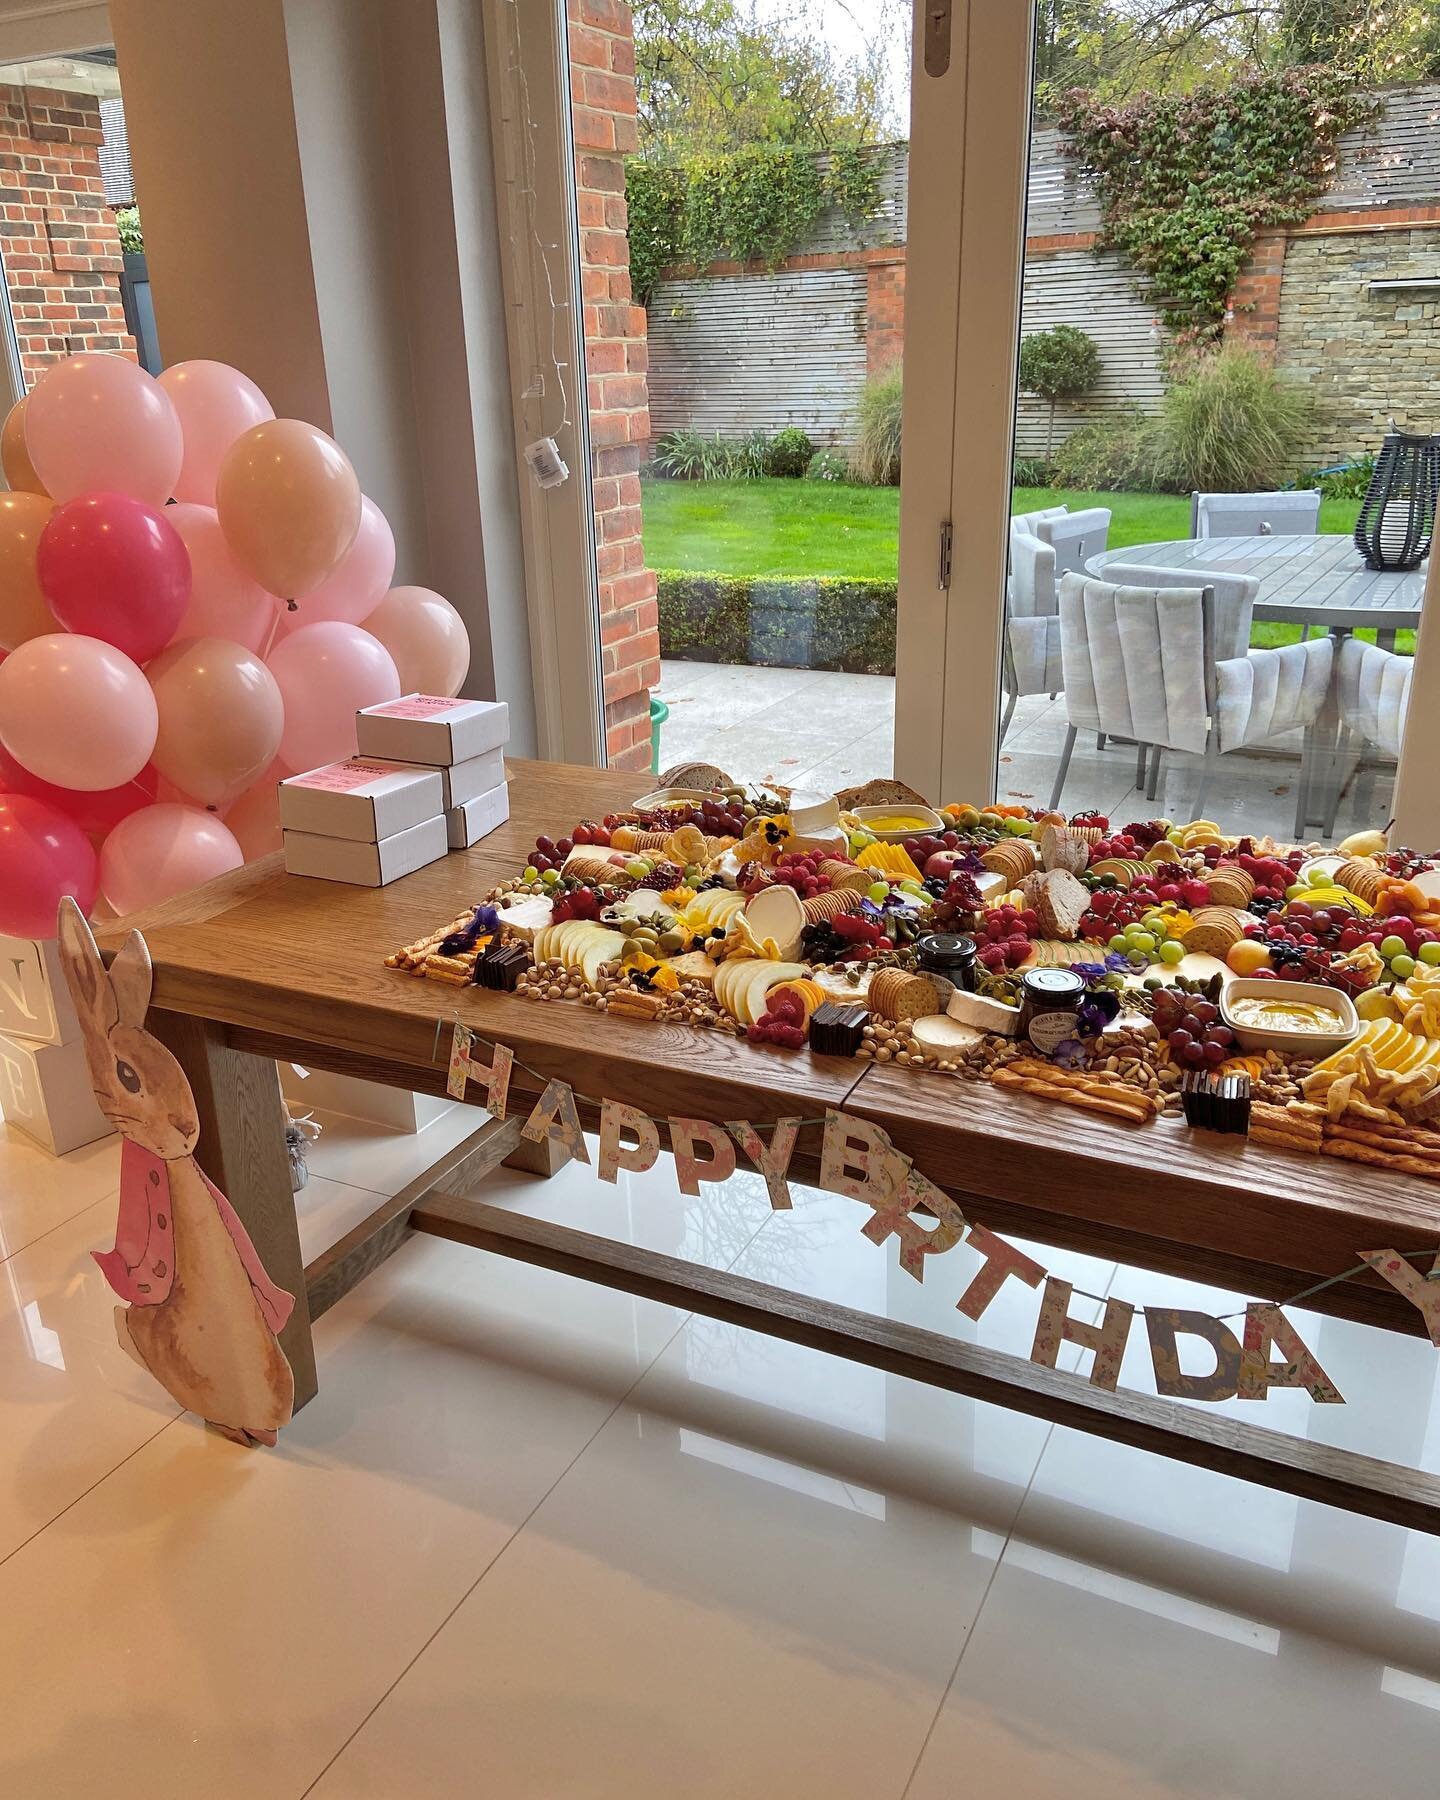 a 1 metre grazing table for a first birthday party. i wish i&rsquo;d taken pics of the decorations because they were adorable! 

i also did mini grazing boxes for the kiddos. so cute 🥰💕🍼